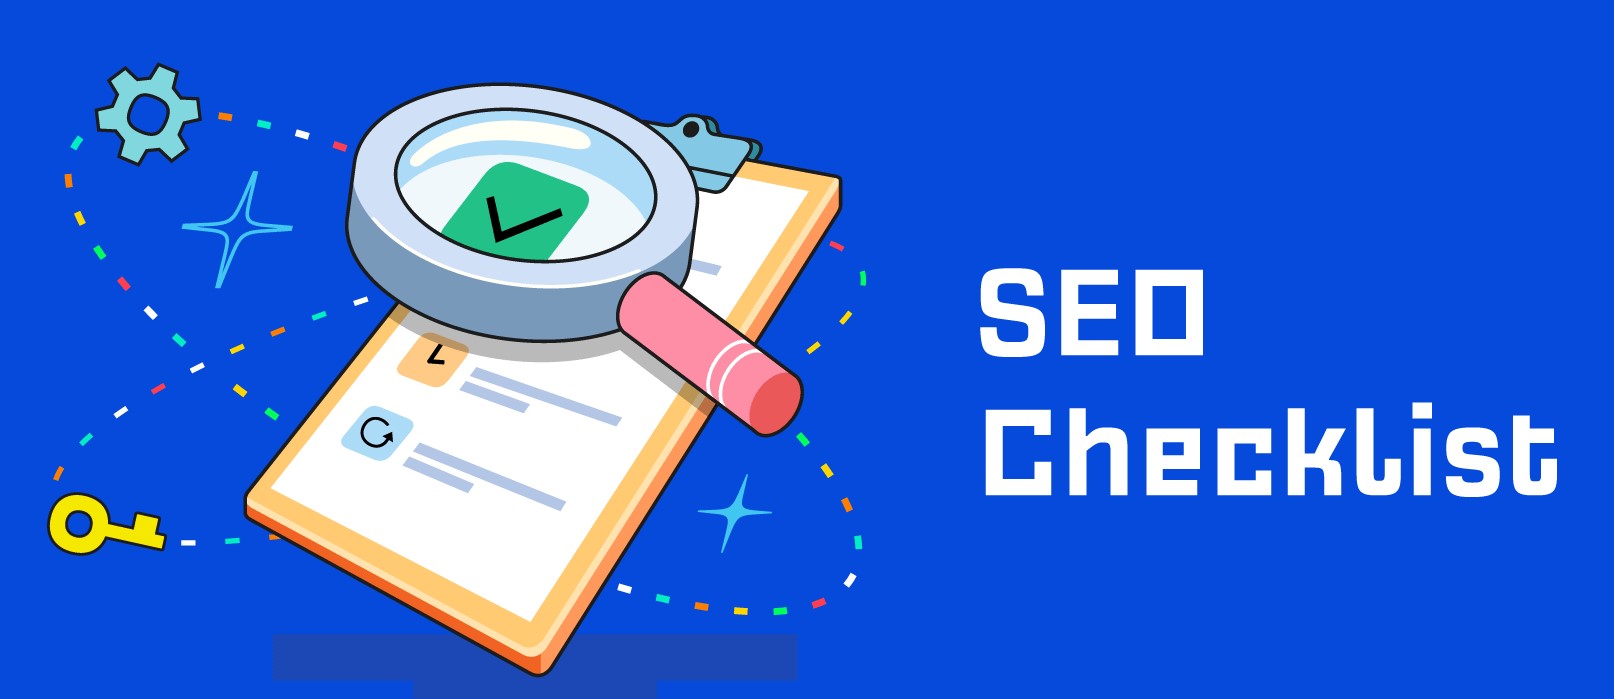 Essential Technical SEO Tricks That Make Your Site Easier to Find